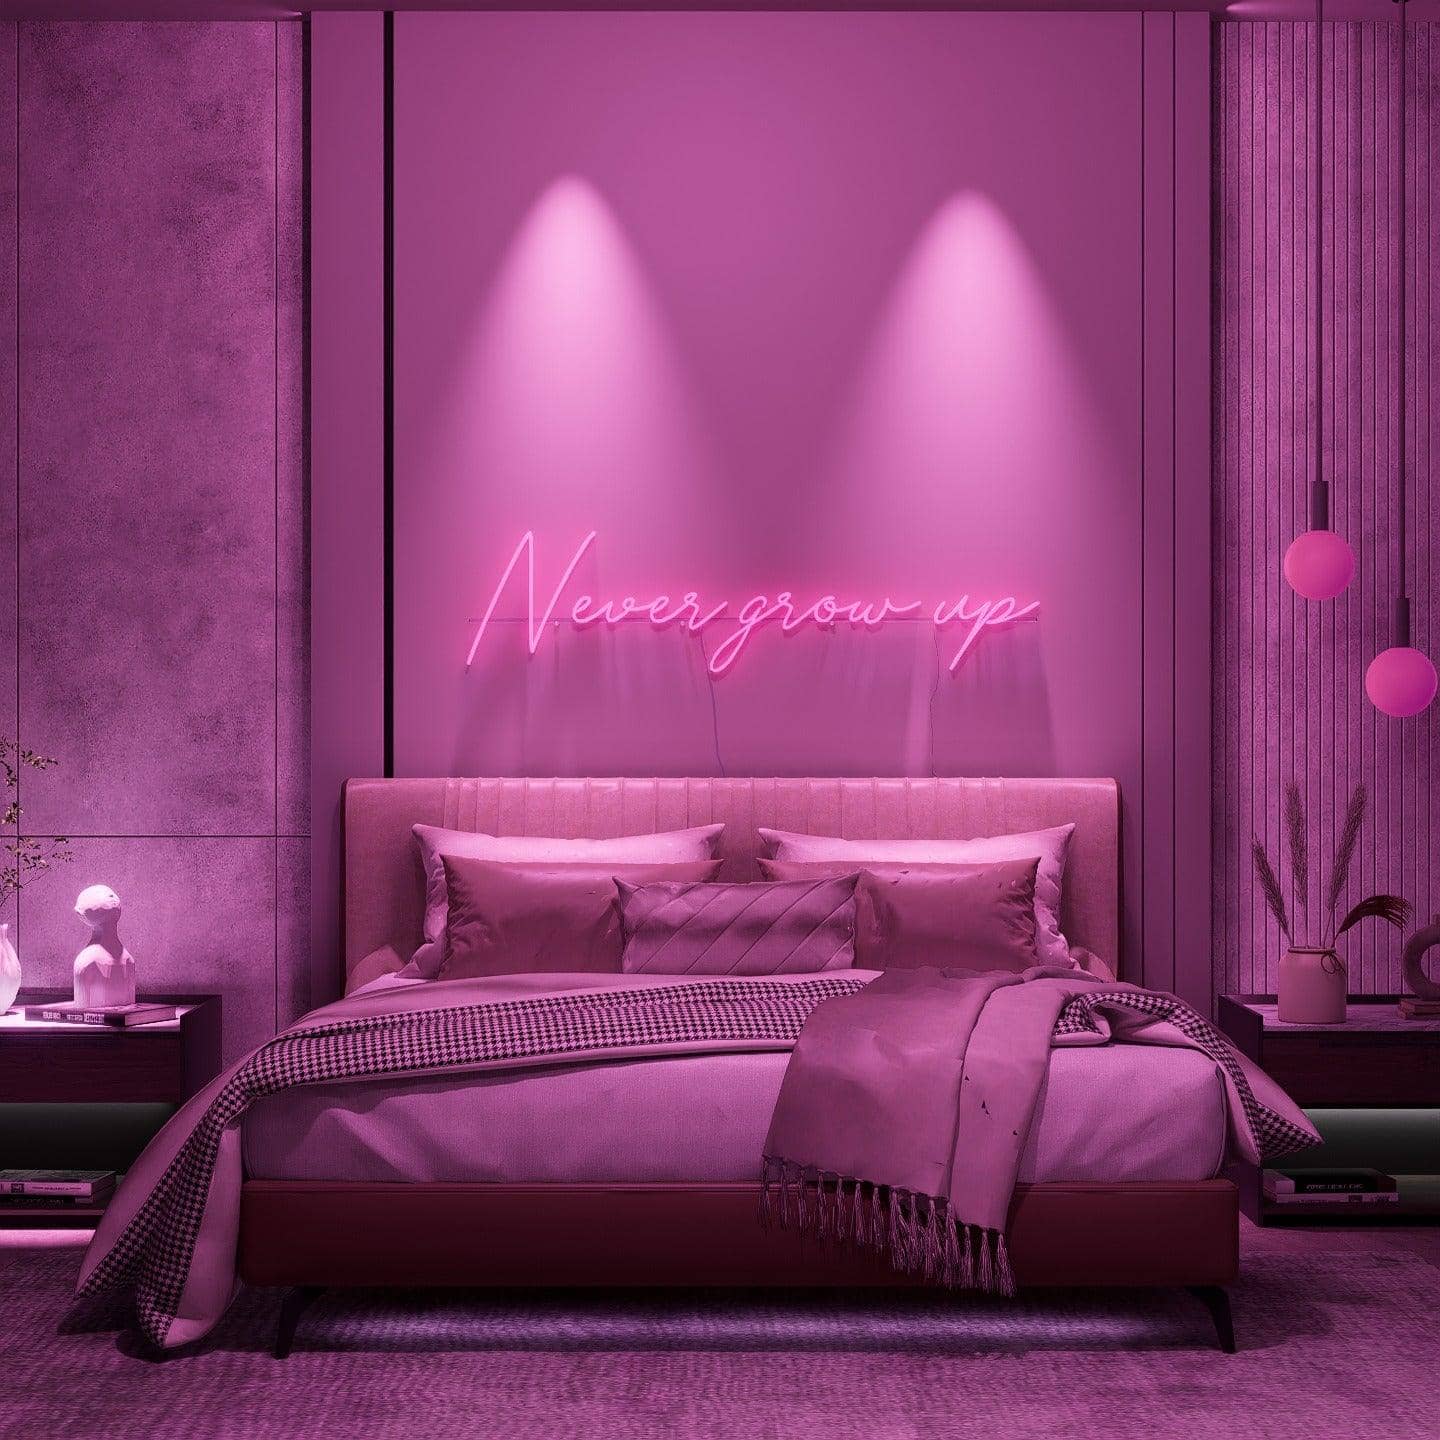 dark-night-lit-pink-neon-lights-hanging-on-the-wall-for-display-never-grow-up